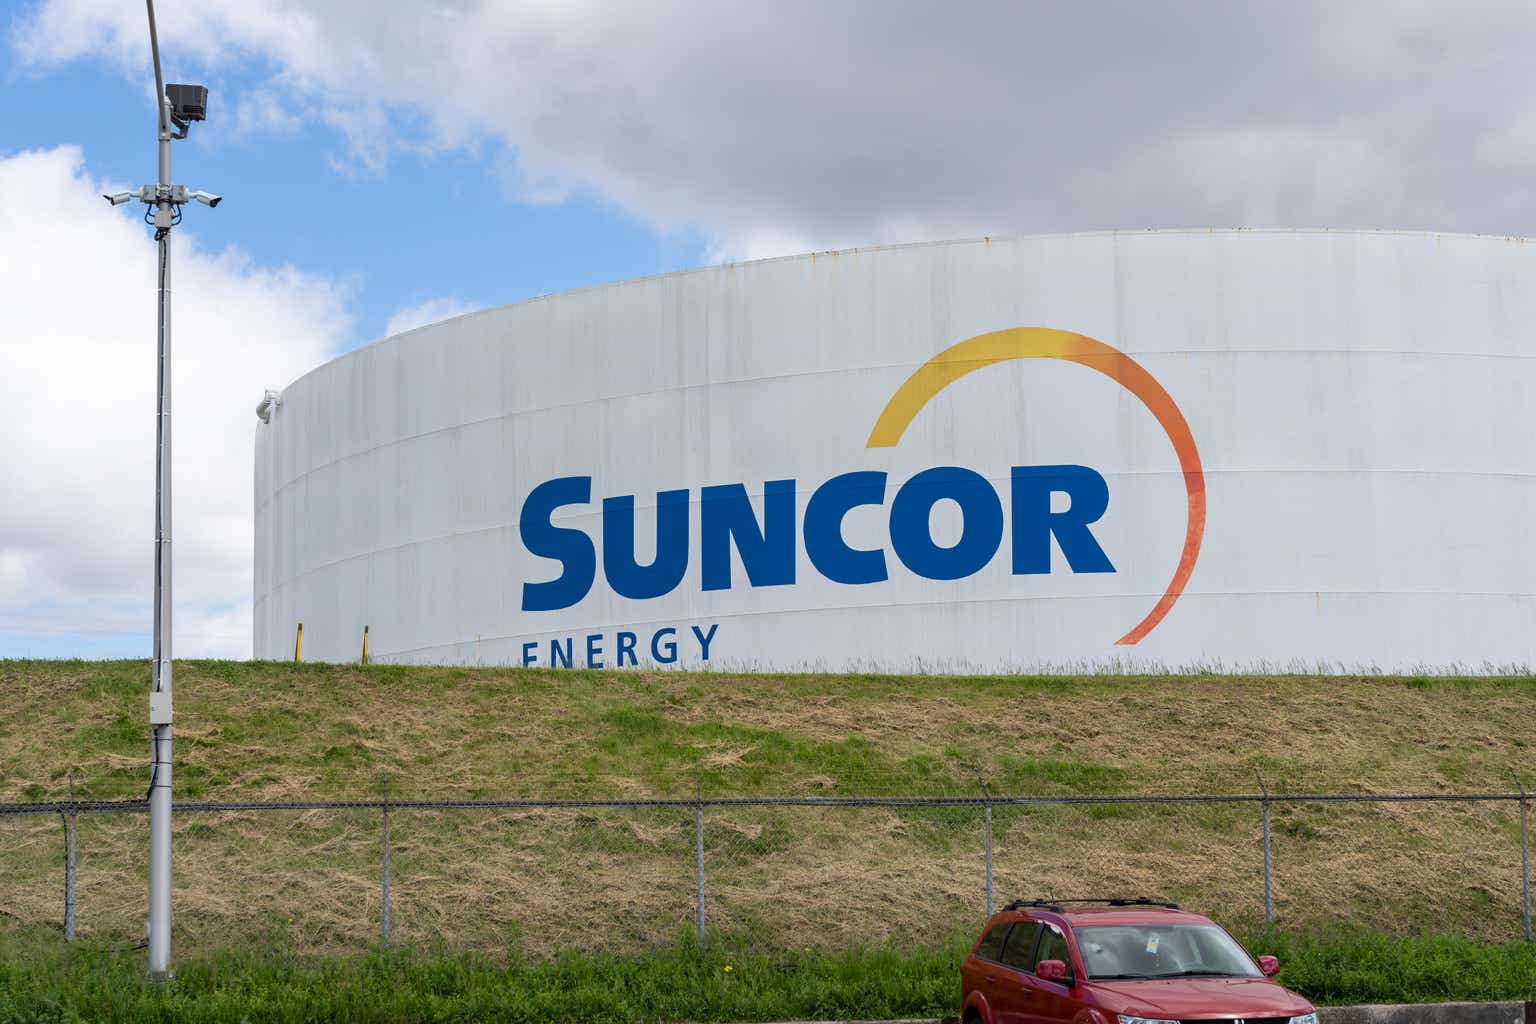 Suncor Digs Out Strong Total Return With 6% Production Growth